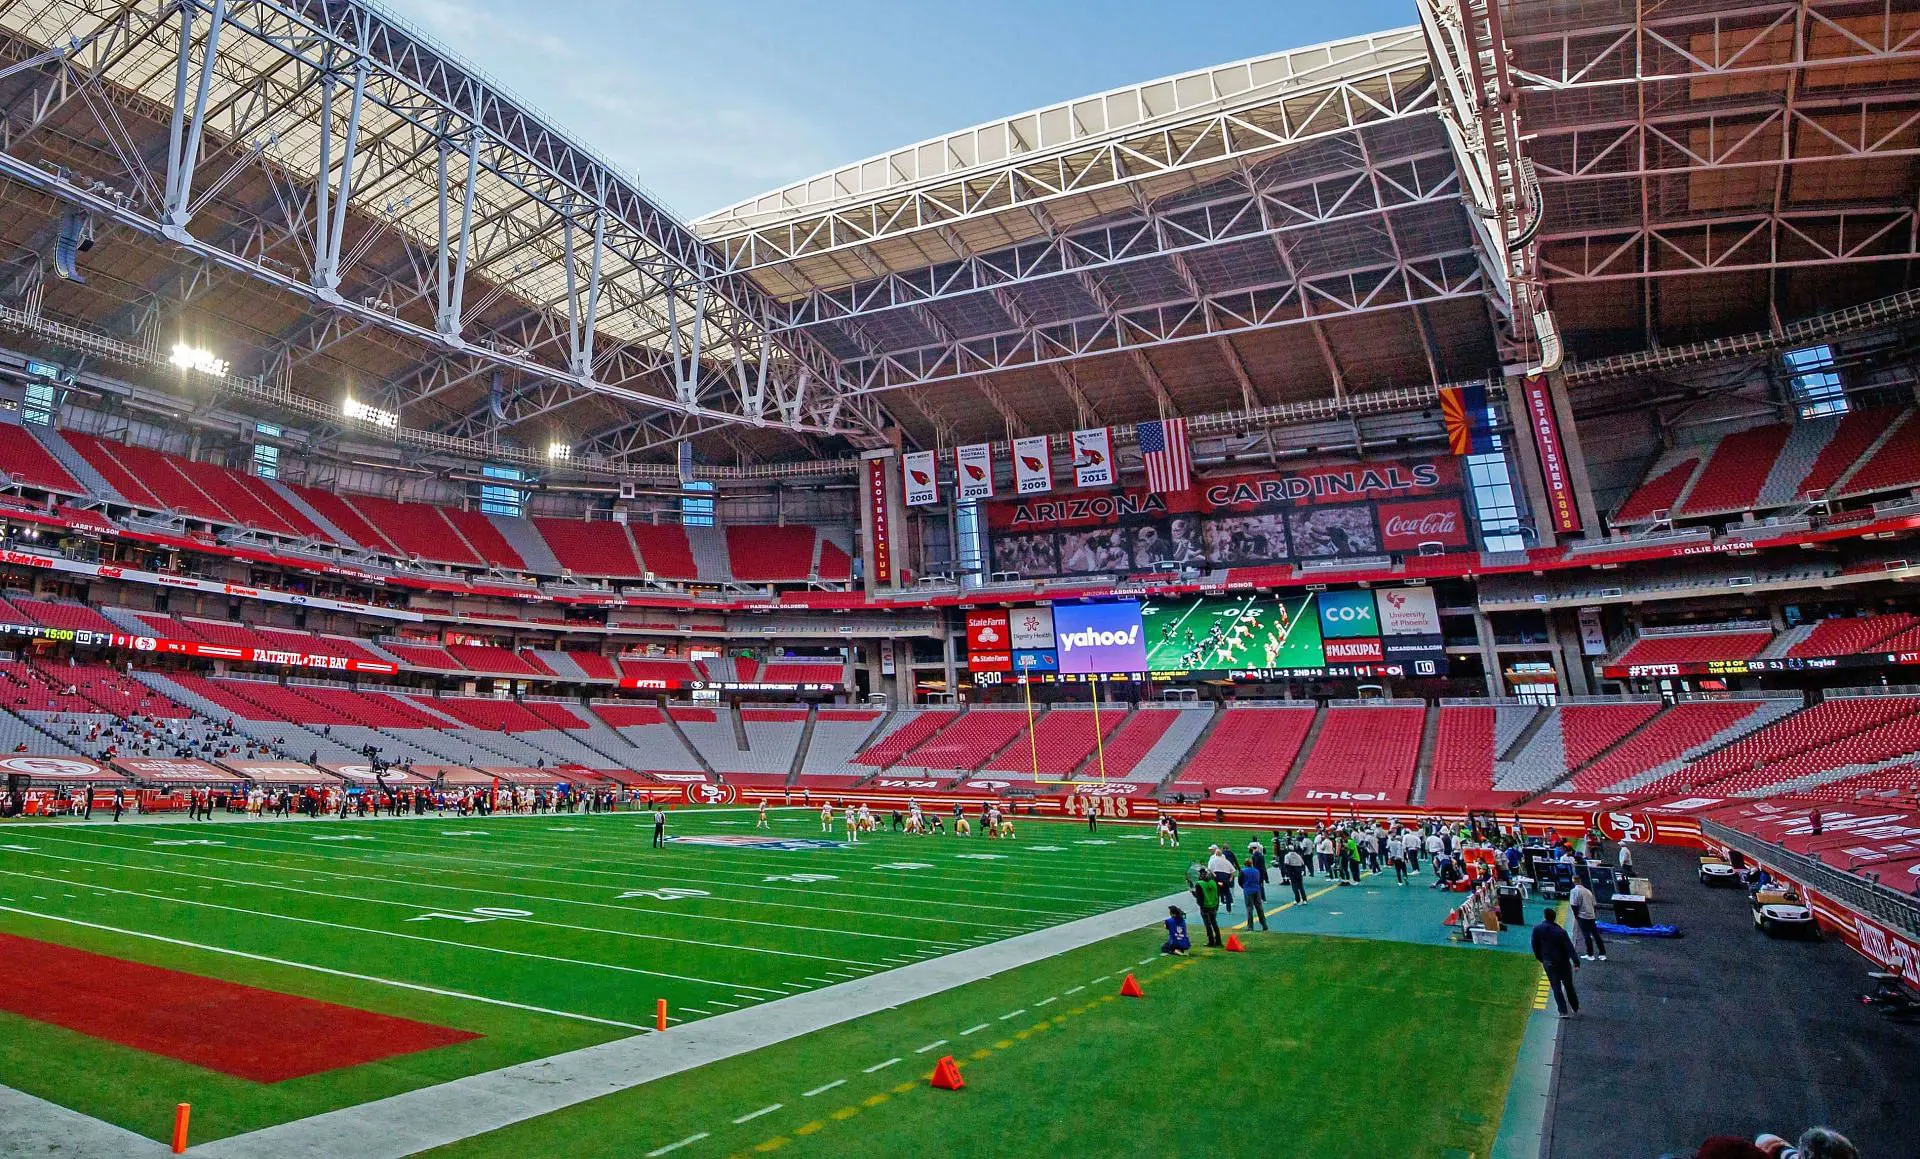 Where is the Super Bowl being held in 2023? State Farm Stadium